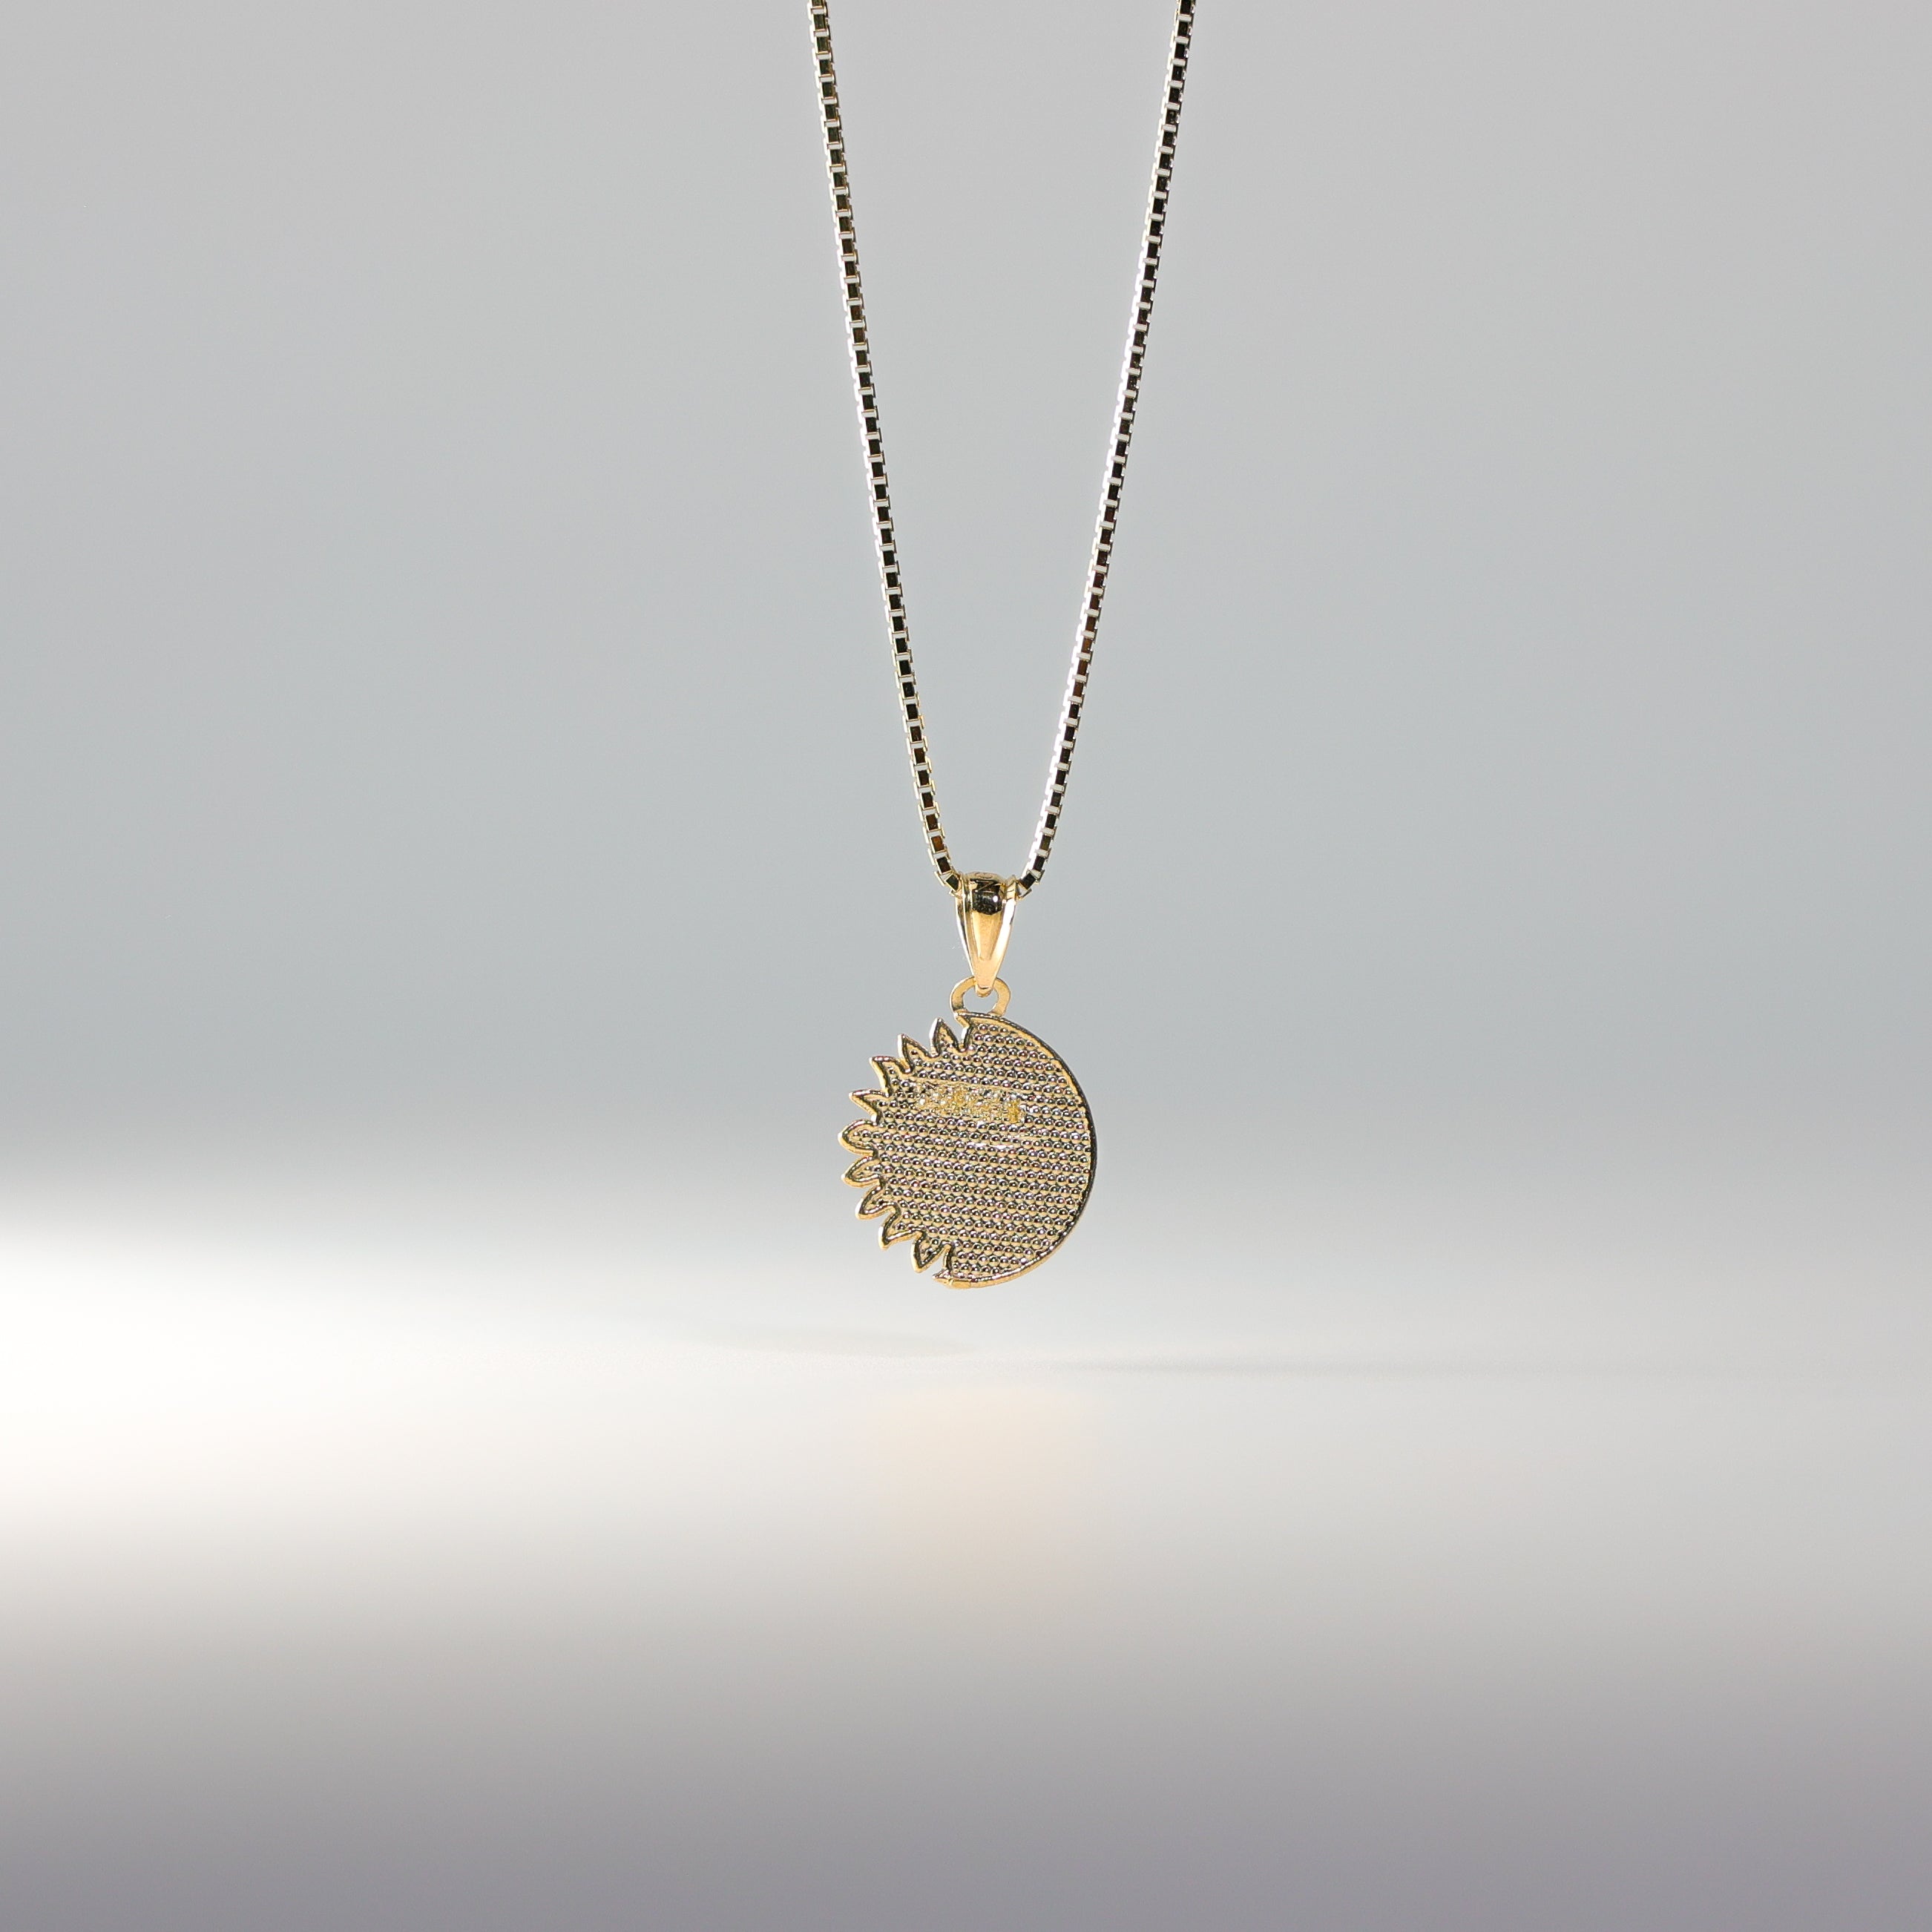 Gold Moon and Sun Pendant Model-1936 - Charlie & Co. Jewelry